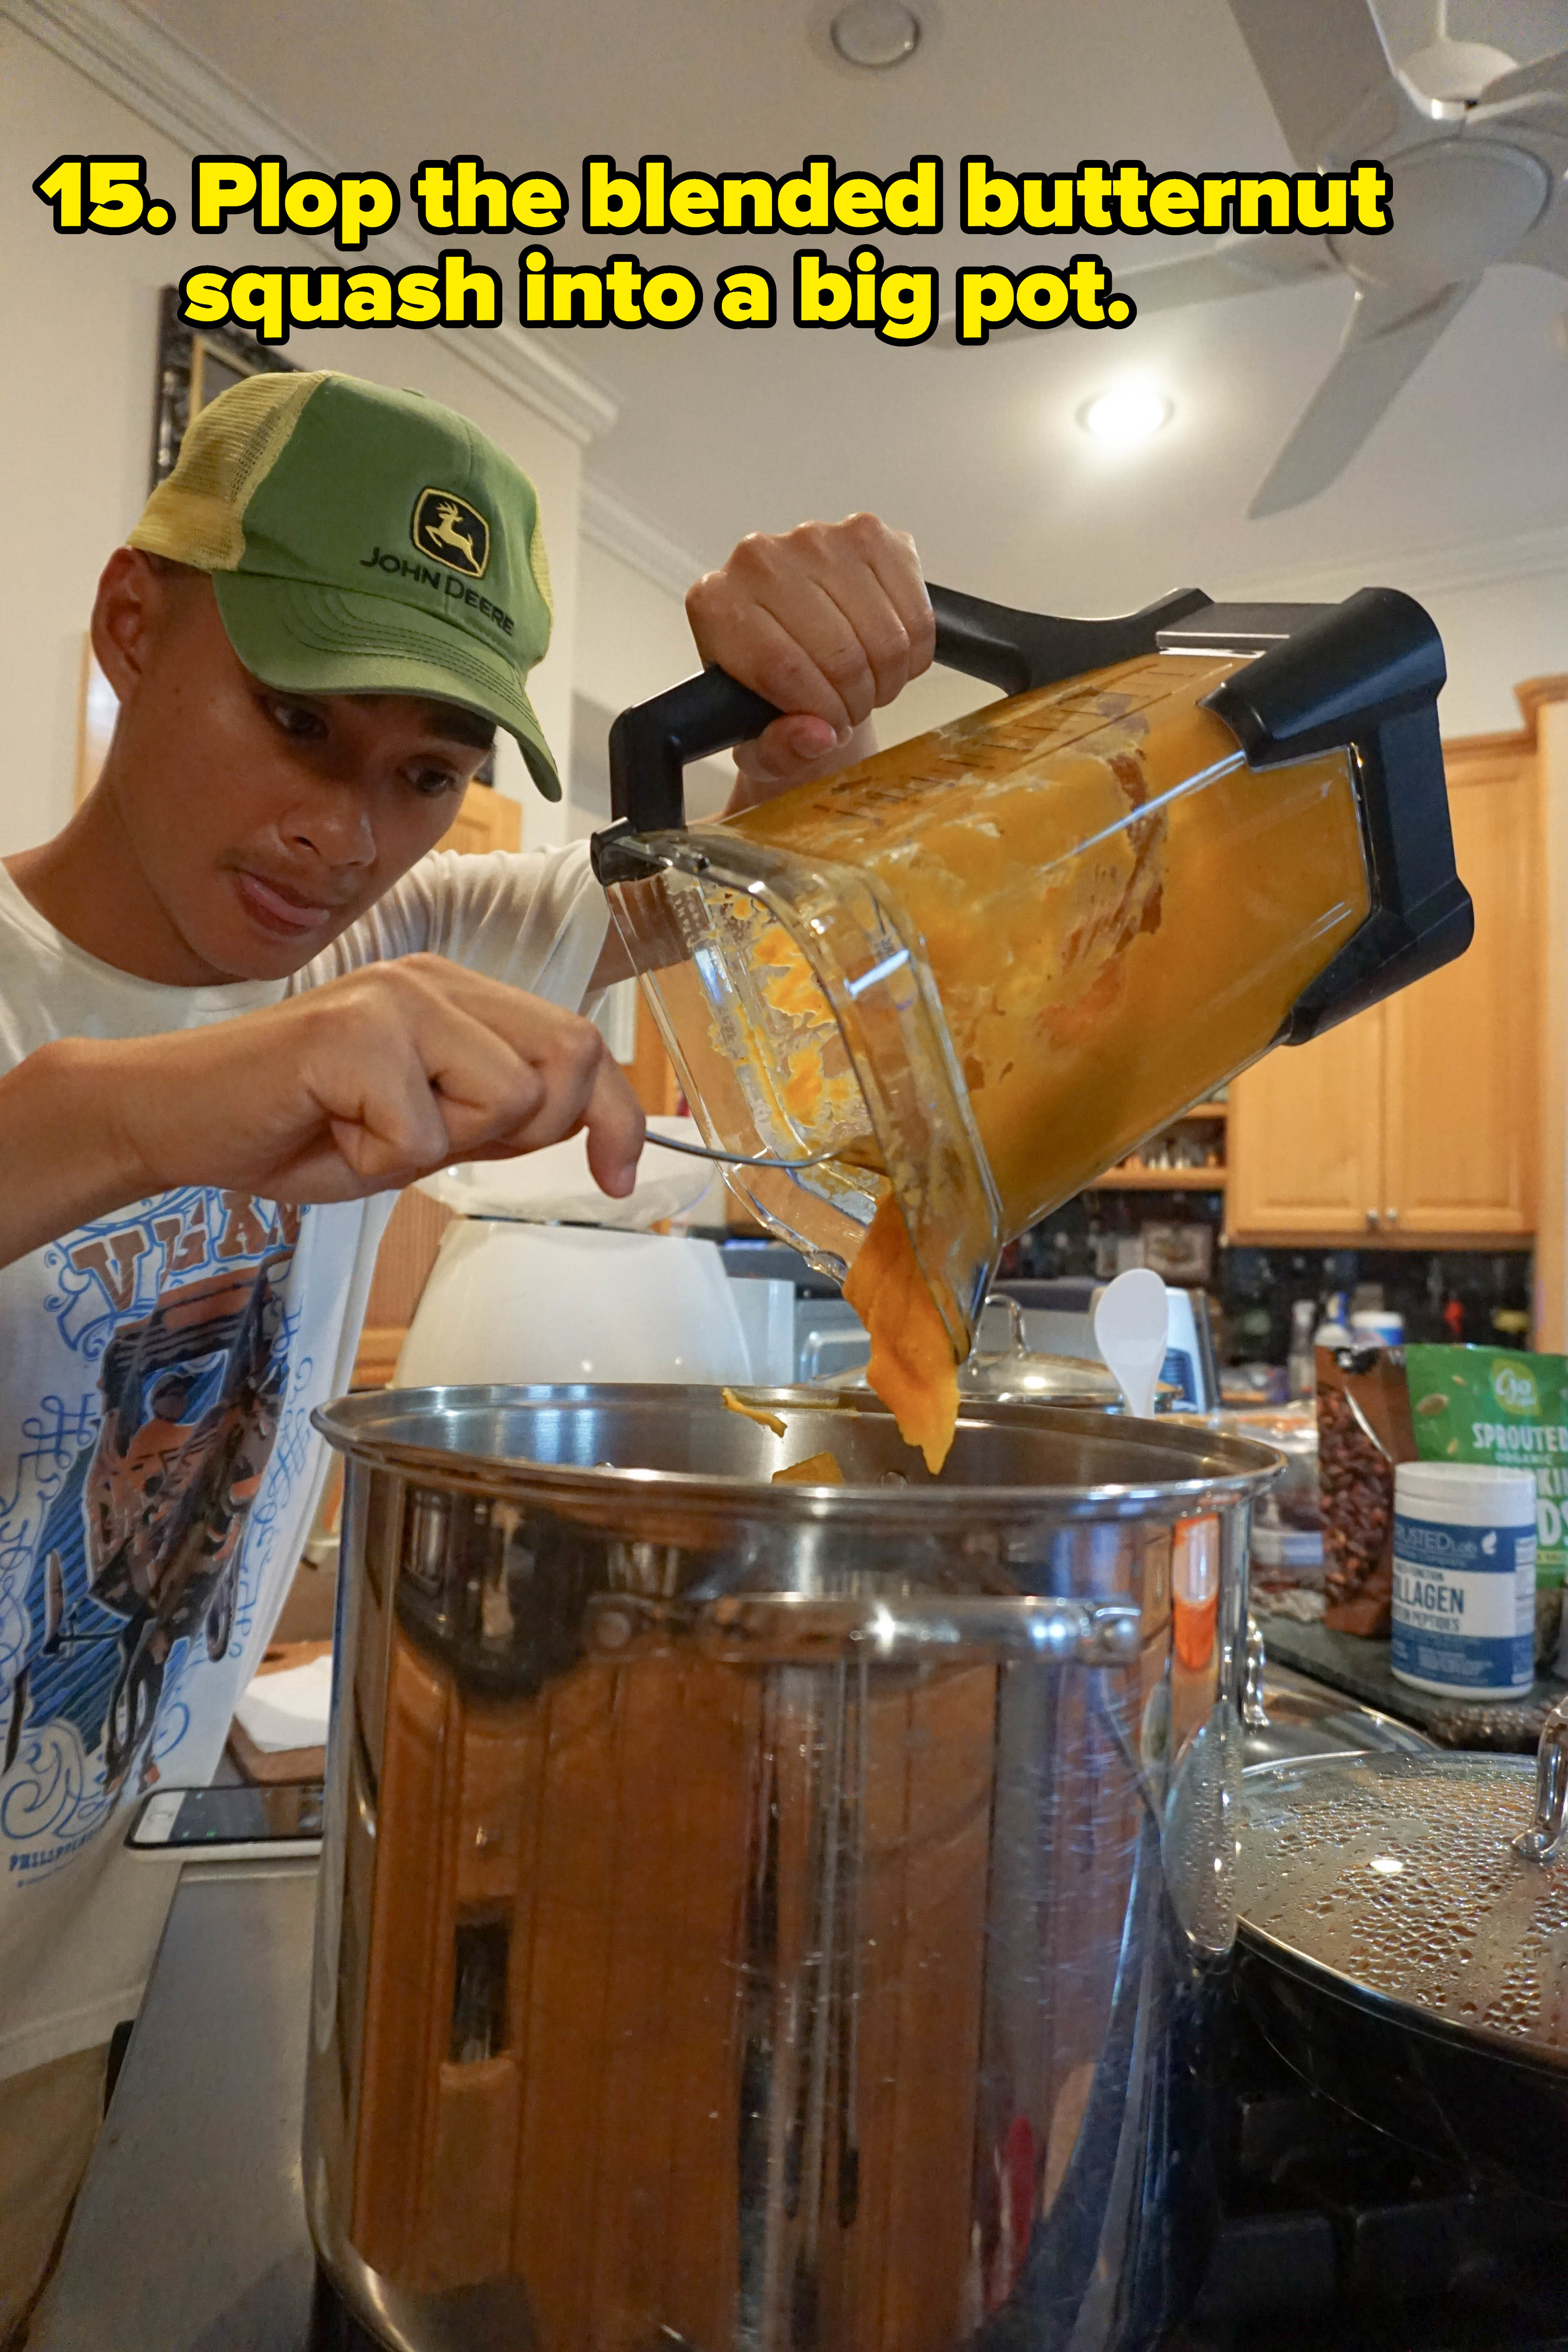 author scooping blended squash into pot